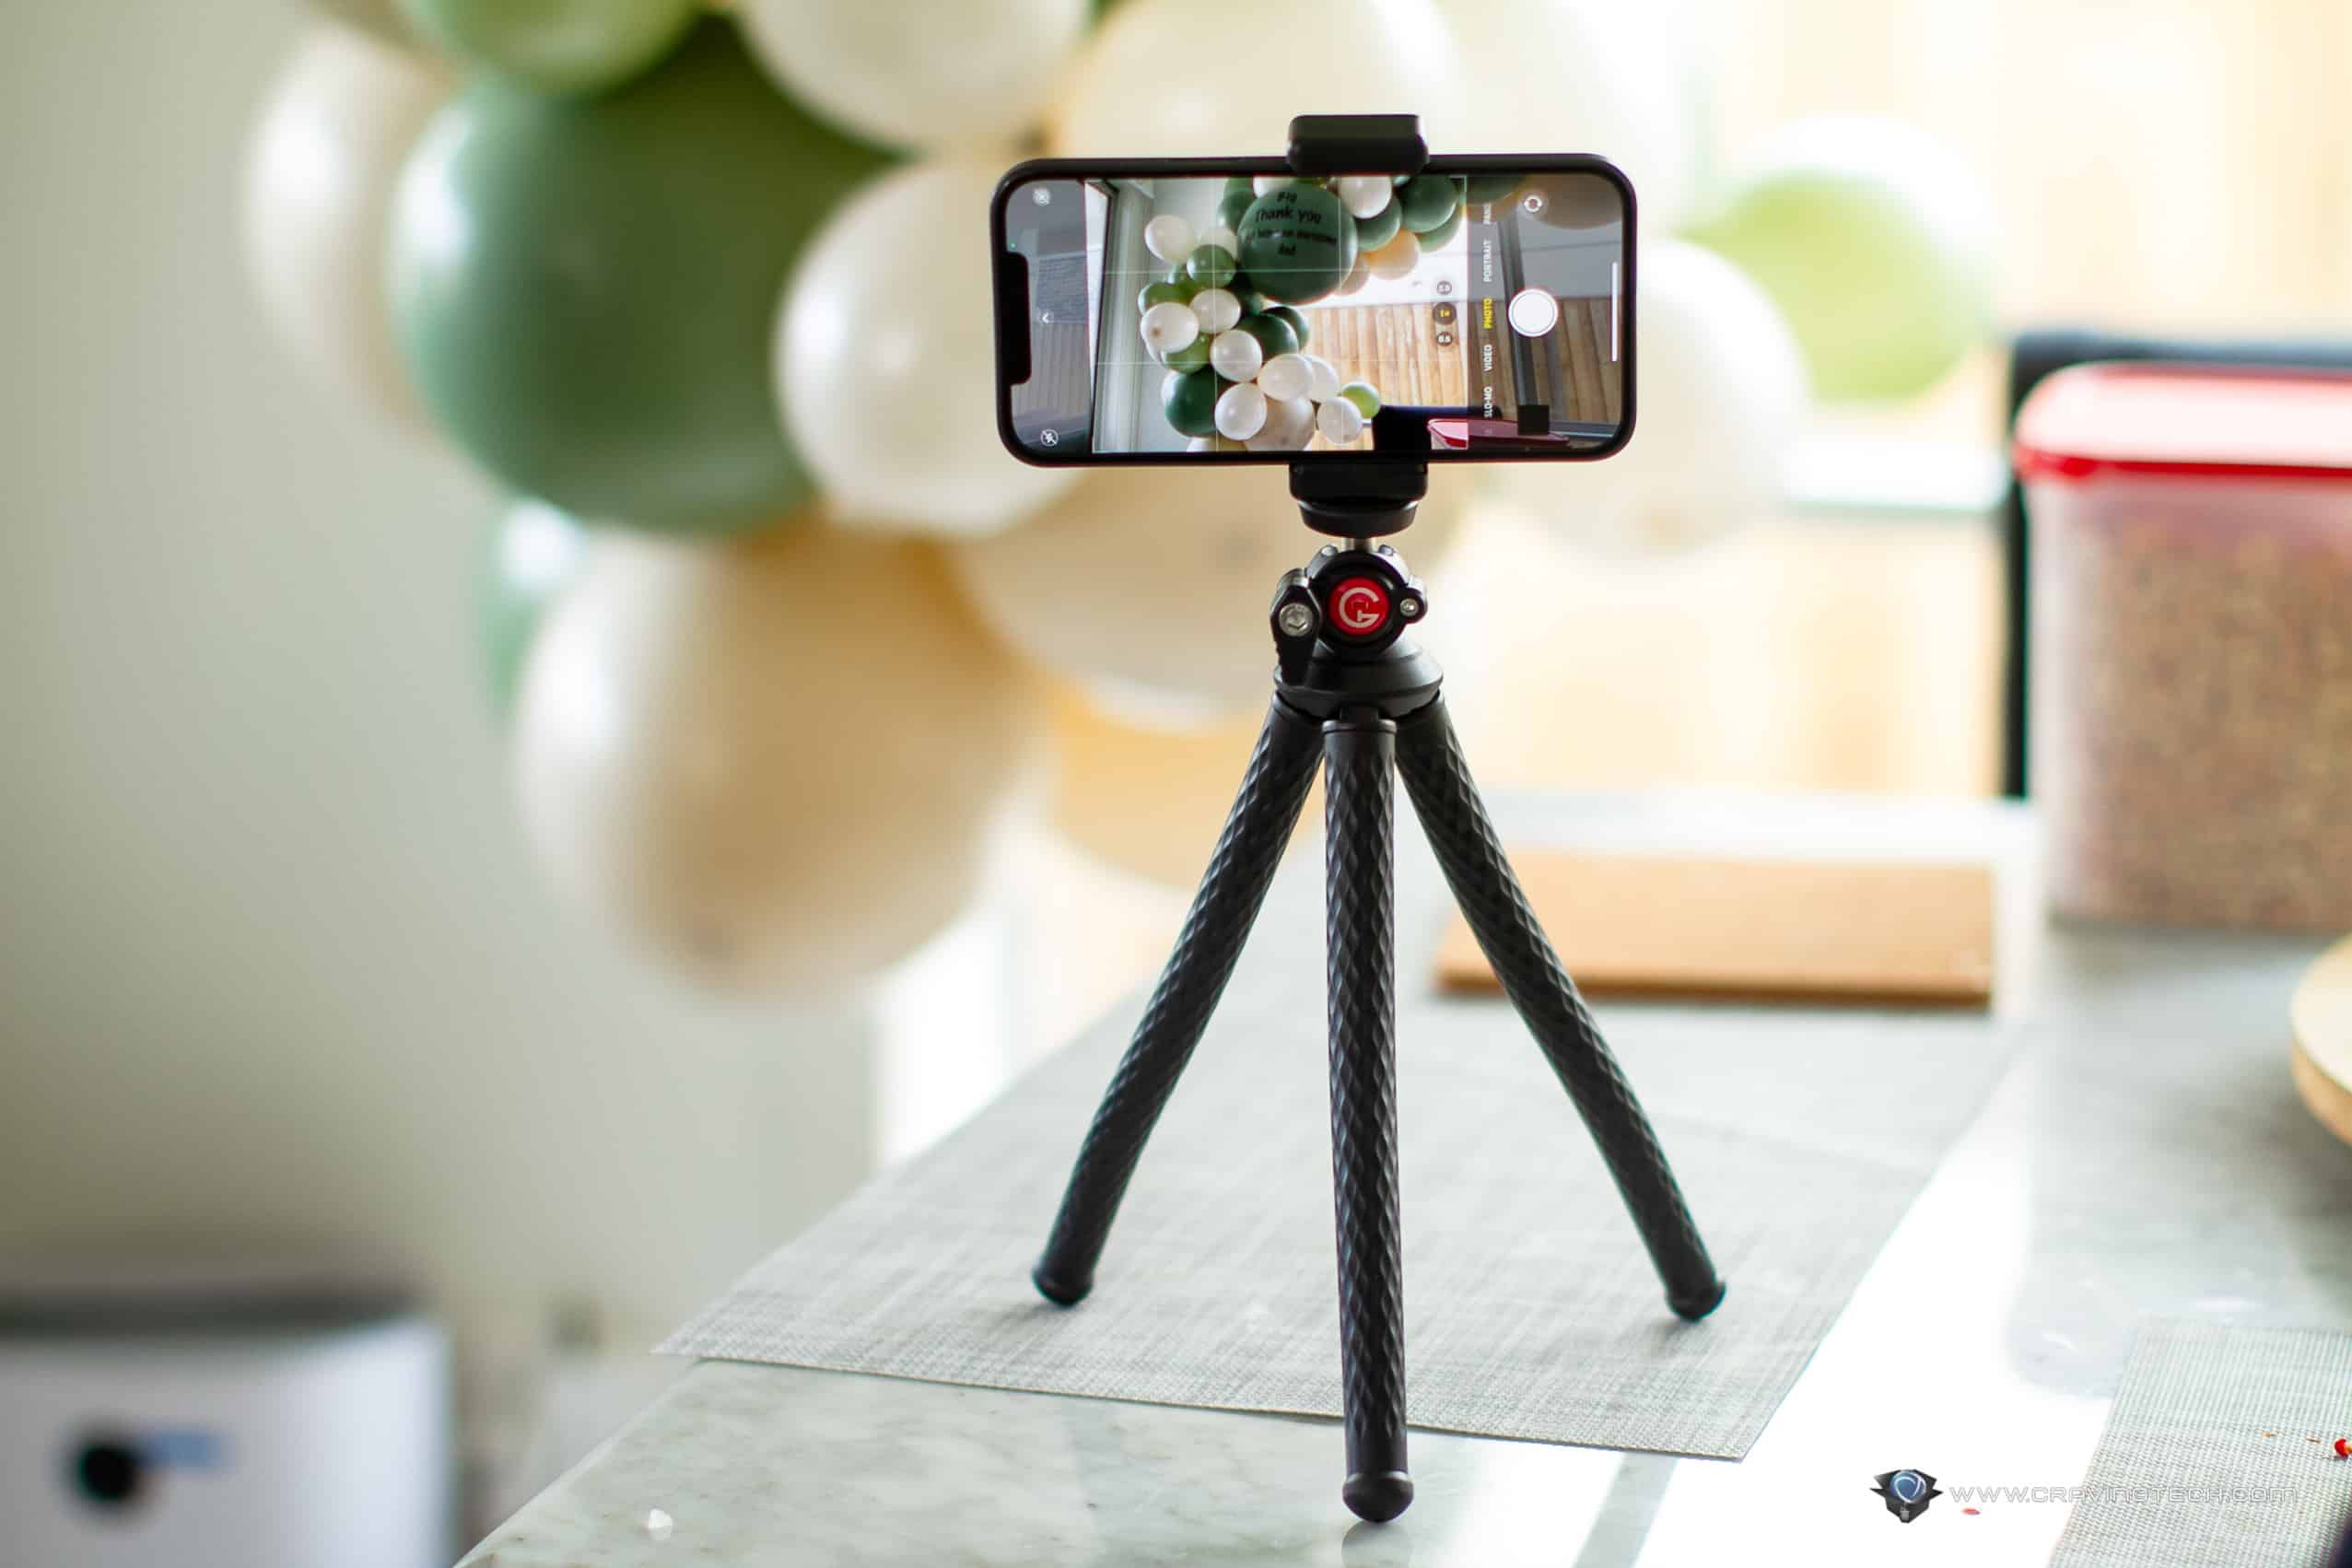 GooFoto Phone Tripod Flexible Tripod with 7 Aluminum Cores&Universal Clip Cell Phone Tripod for iPhone/Samsung/Android Portable Small Tripod Stand for Cameras 